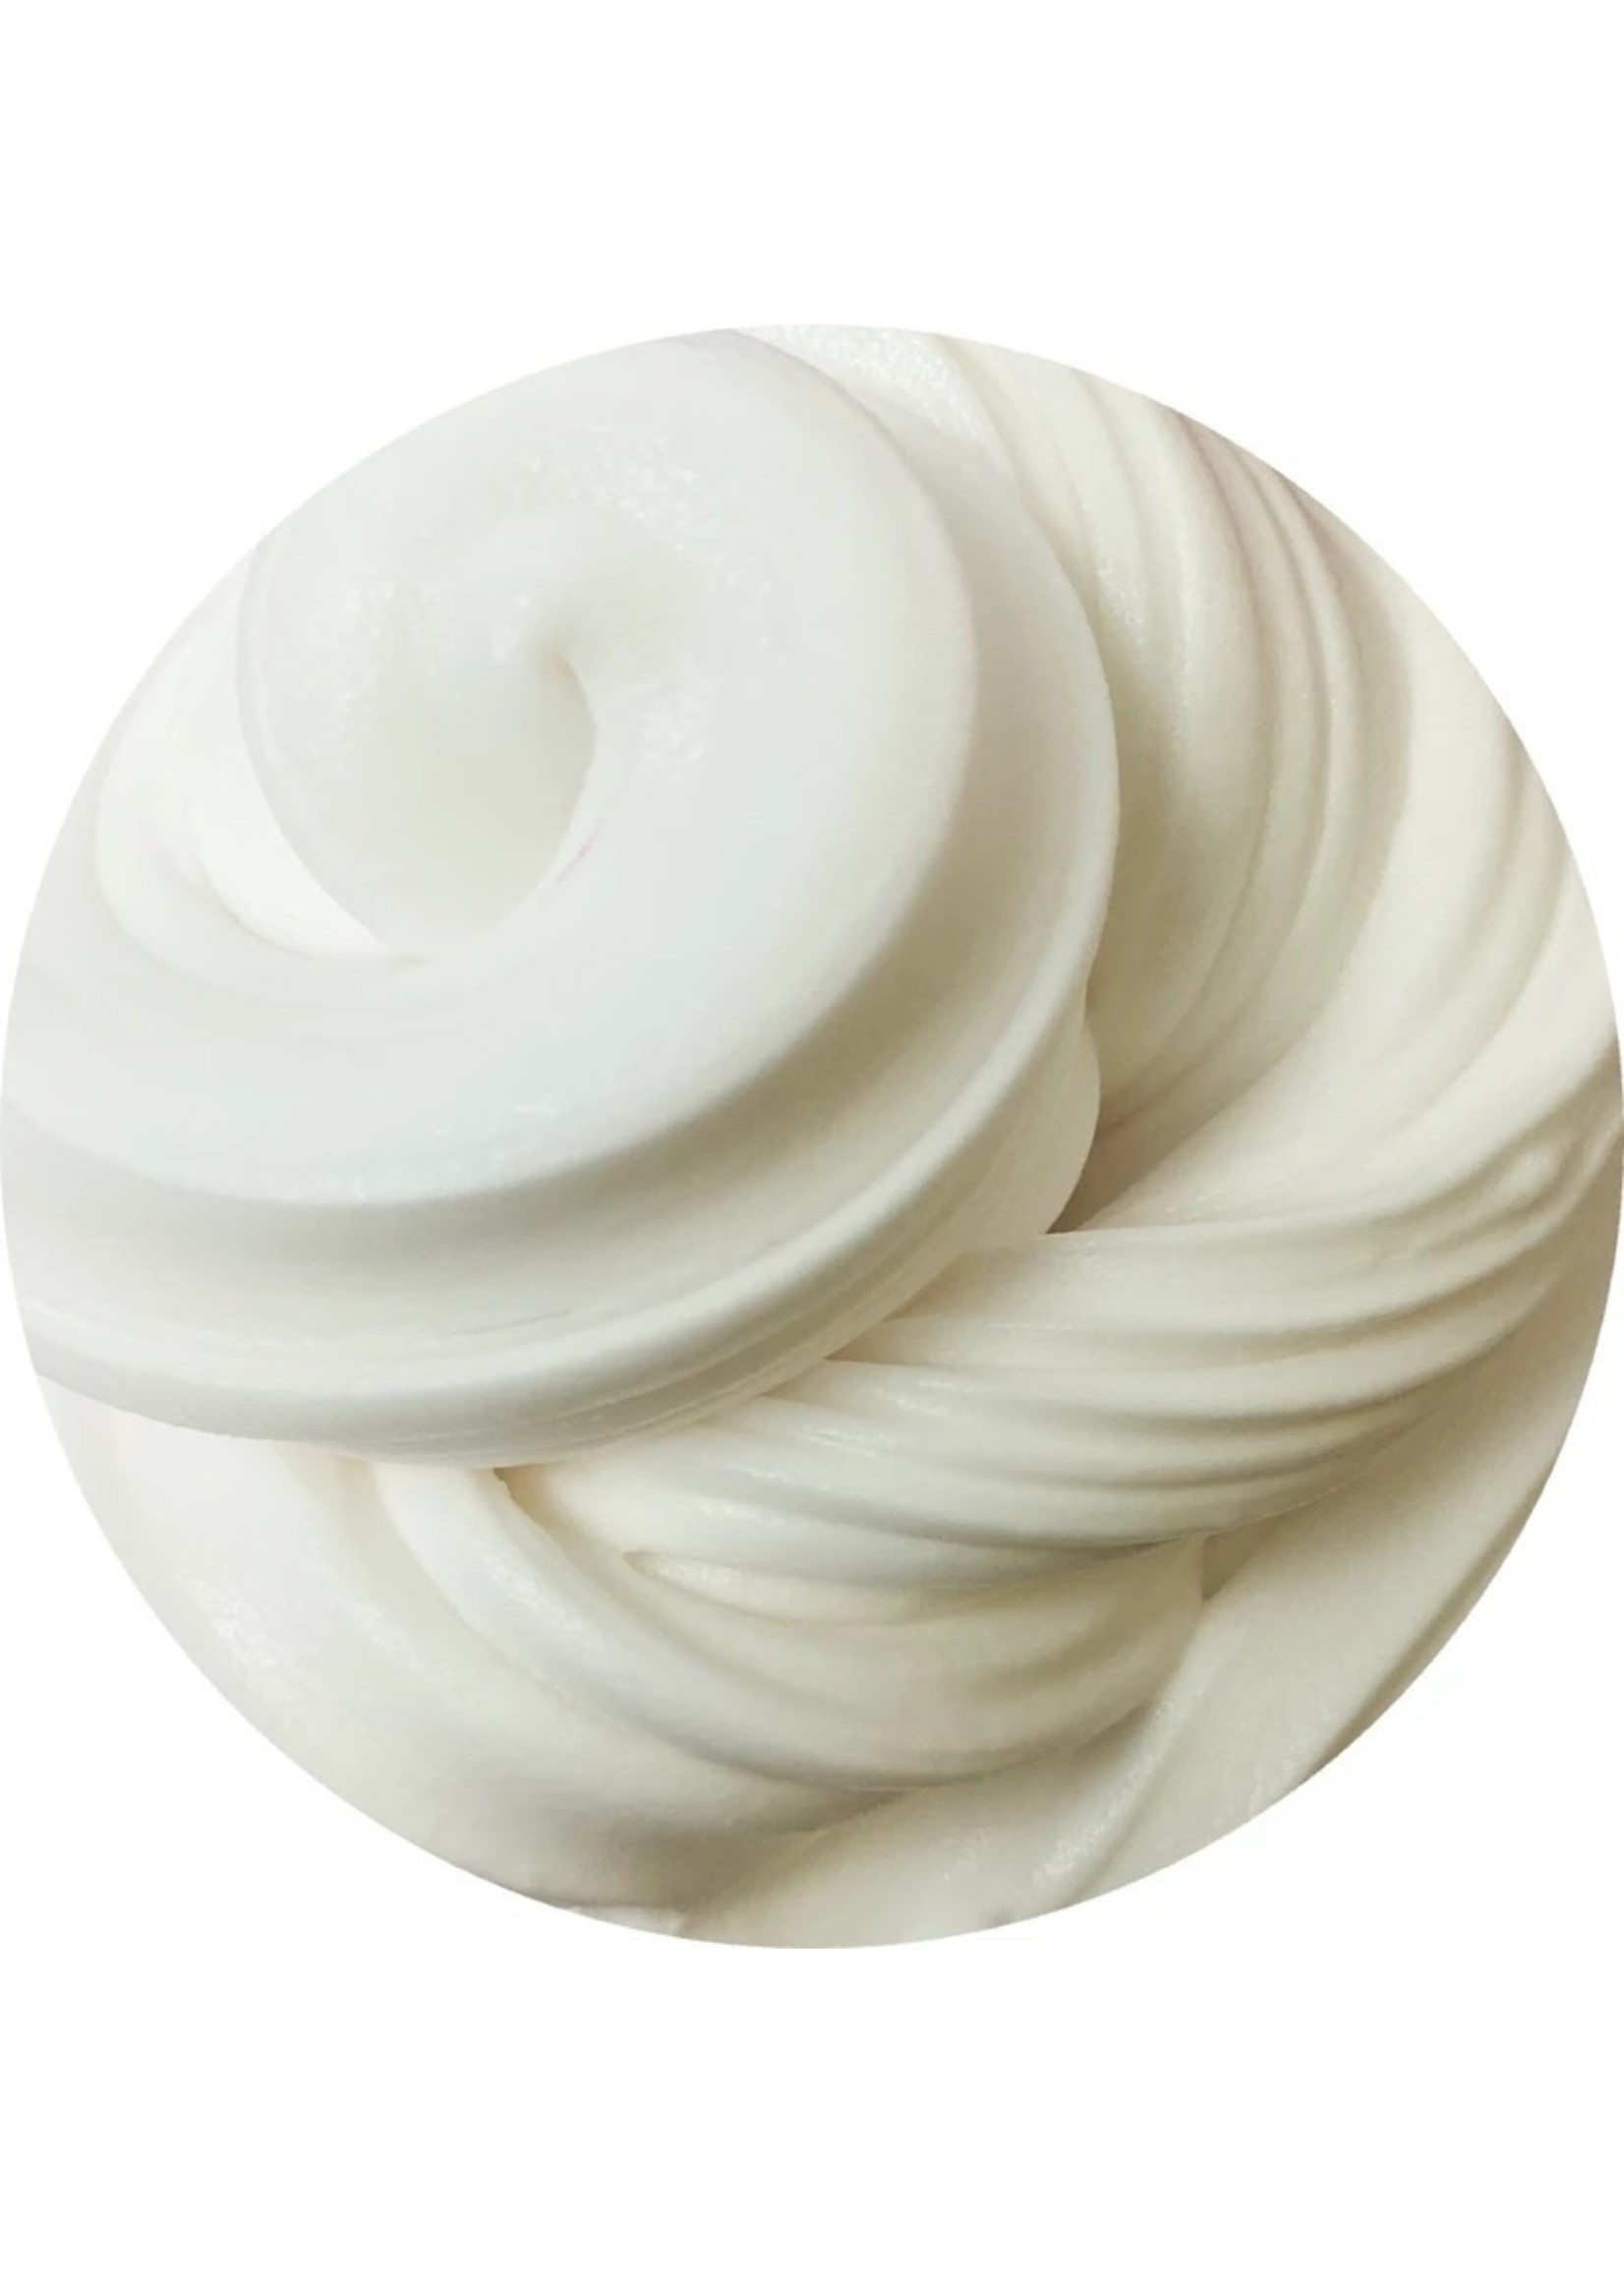 Dope Slimes Marshmallow Puff Butter Slime - 8 oz